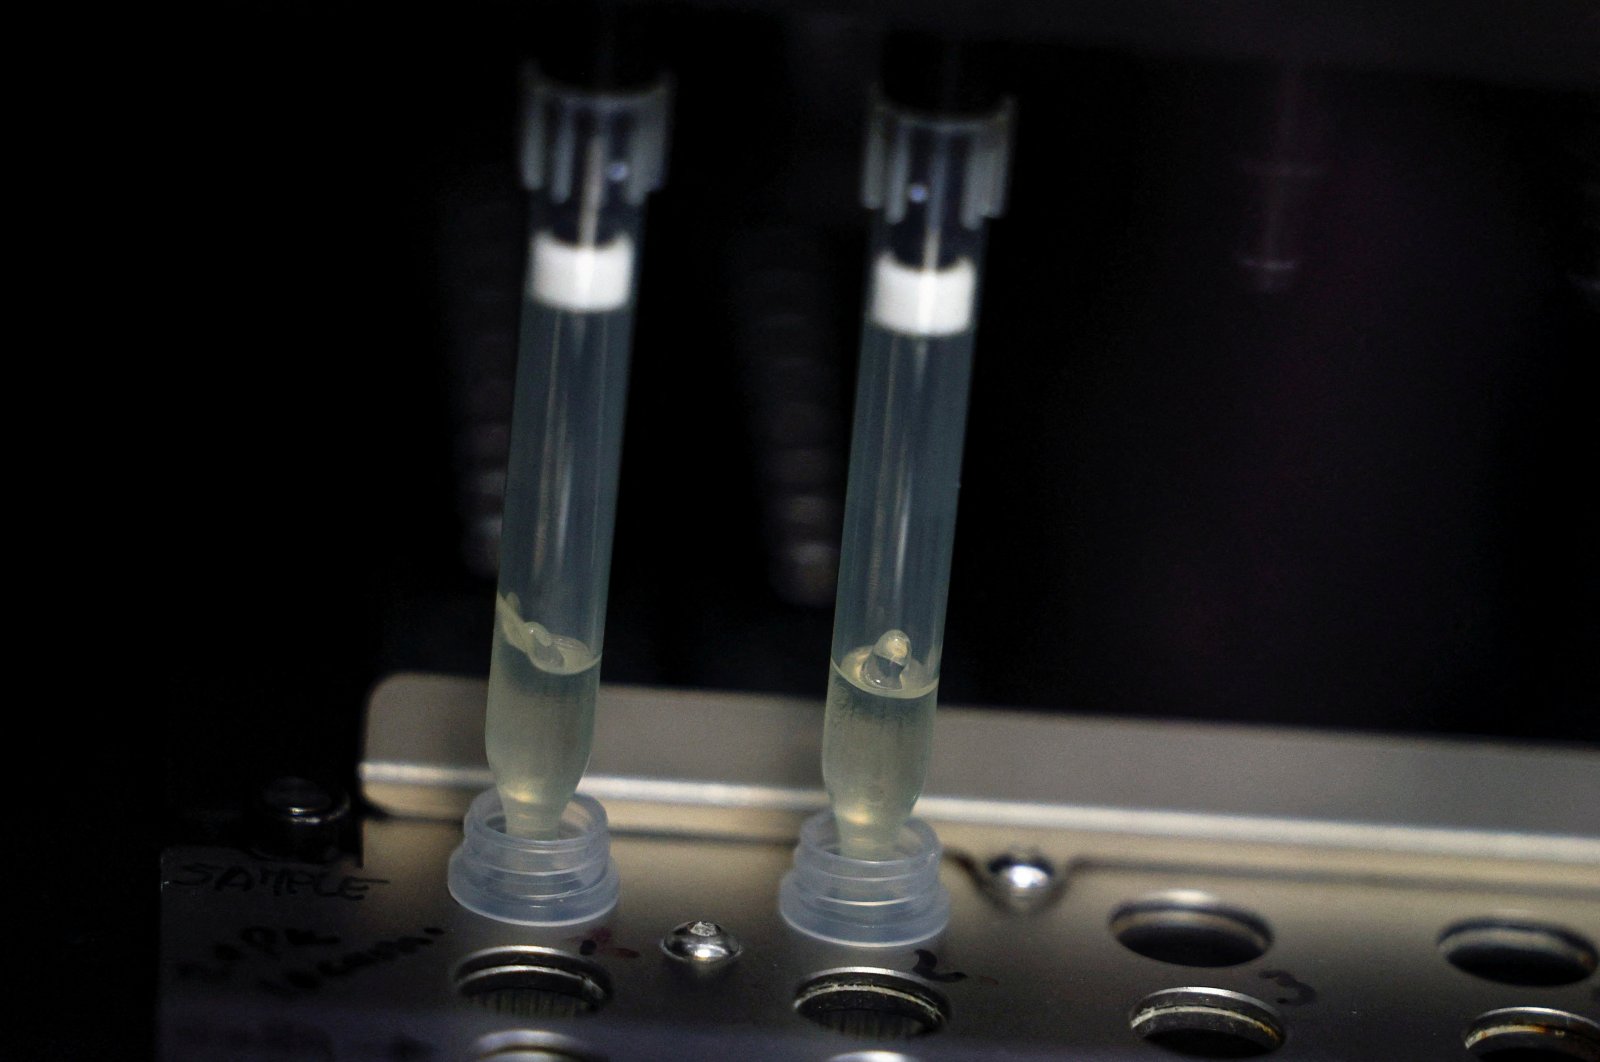 Two samples of suspected cases of monkeypox go through a process of nucleic acid extraction as they get tested at a microbiology lab at La Paz Hospital in Madrid, Spain, June 1, 2022. (Reuters Photo)